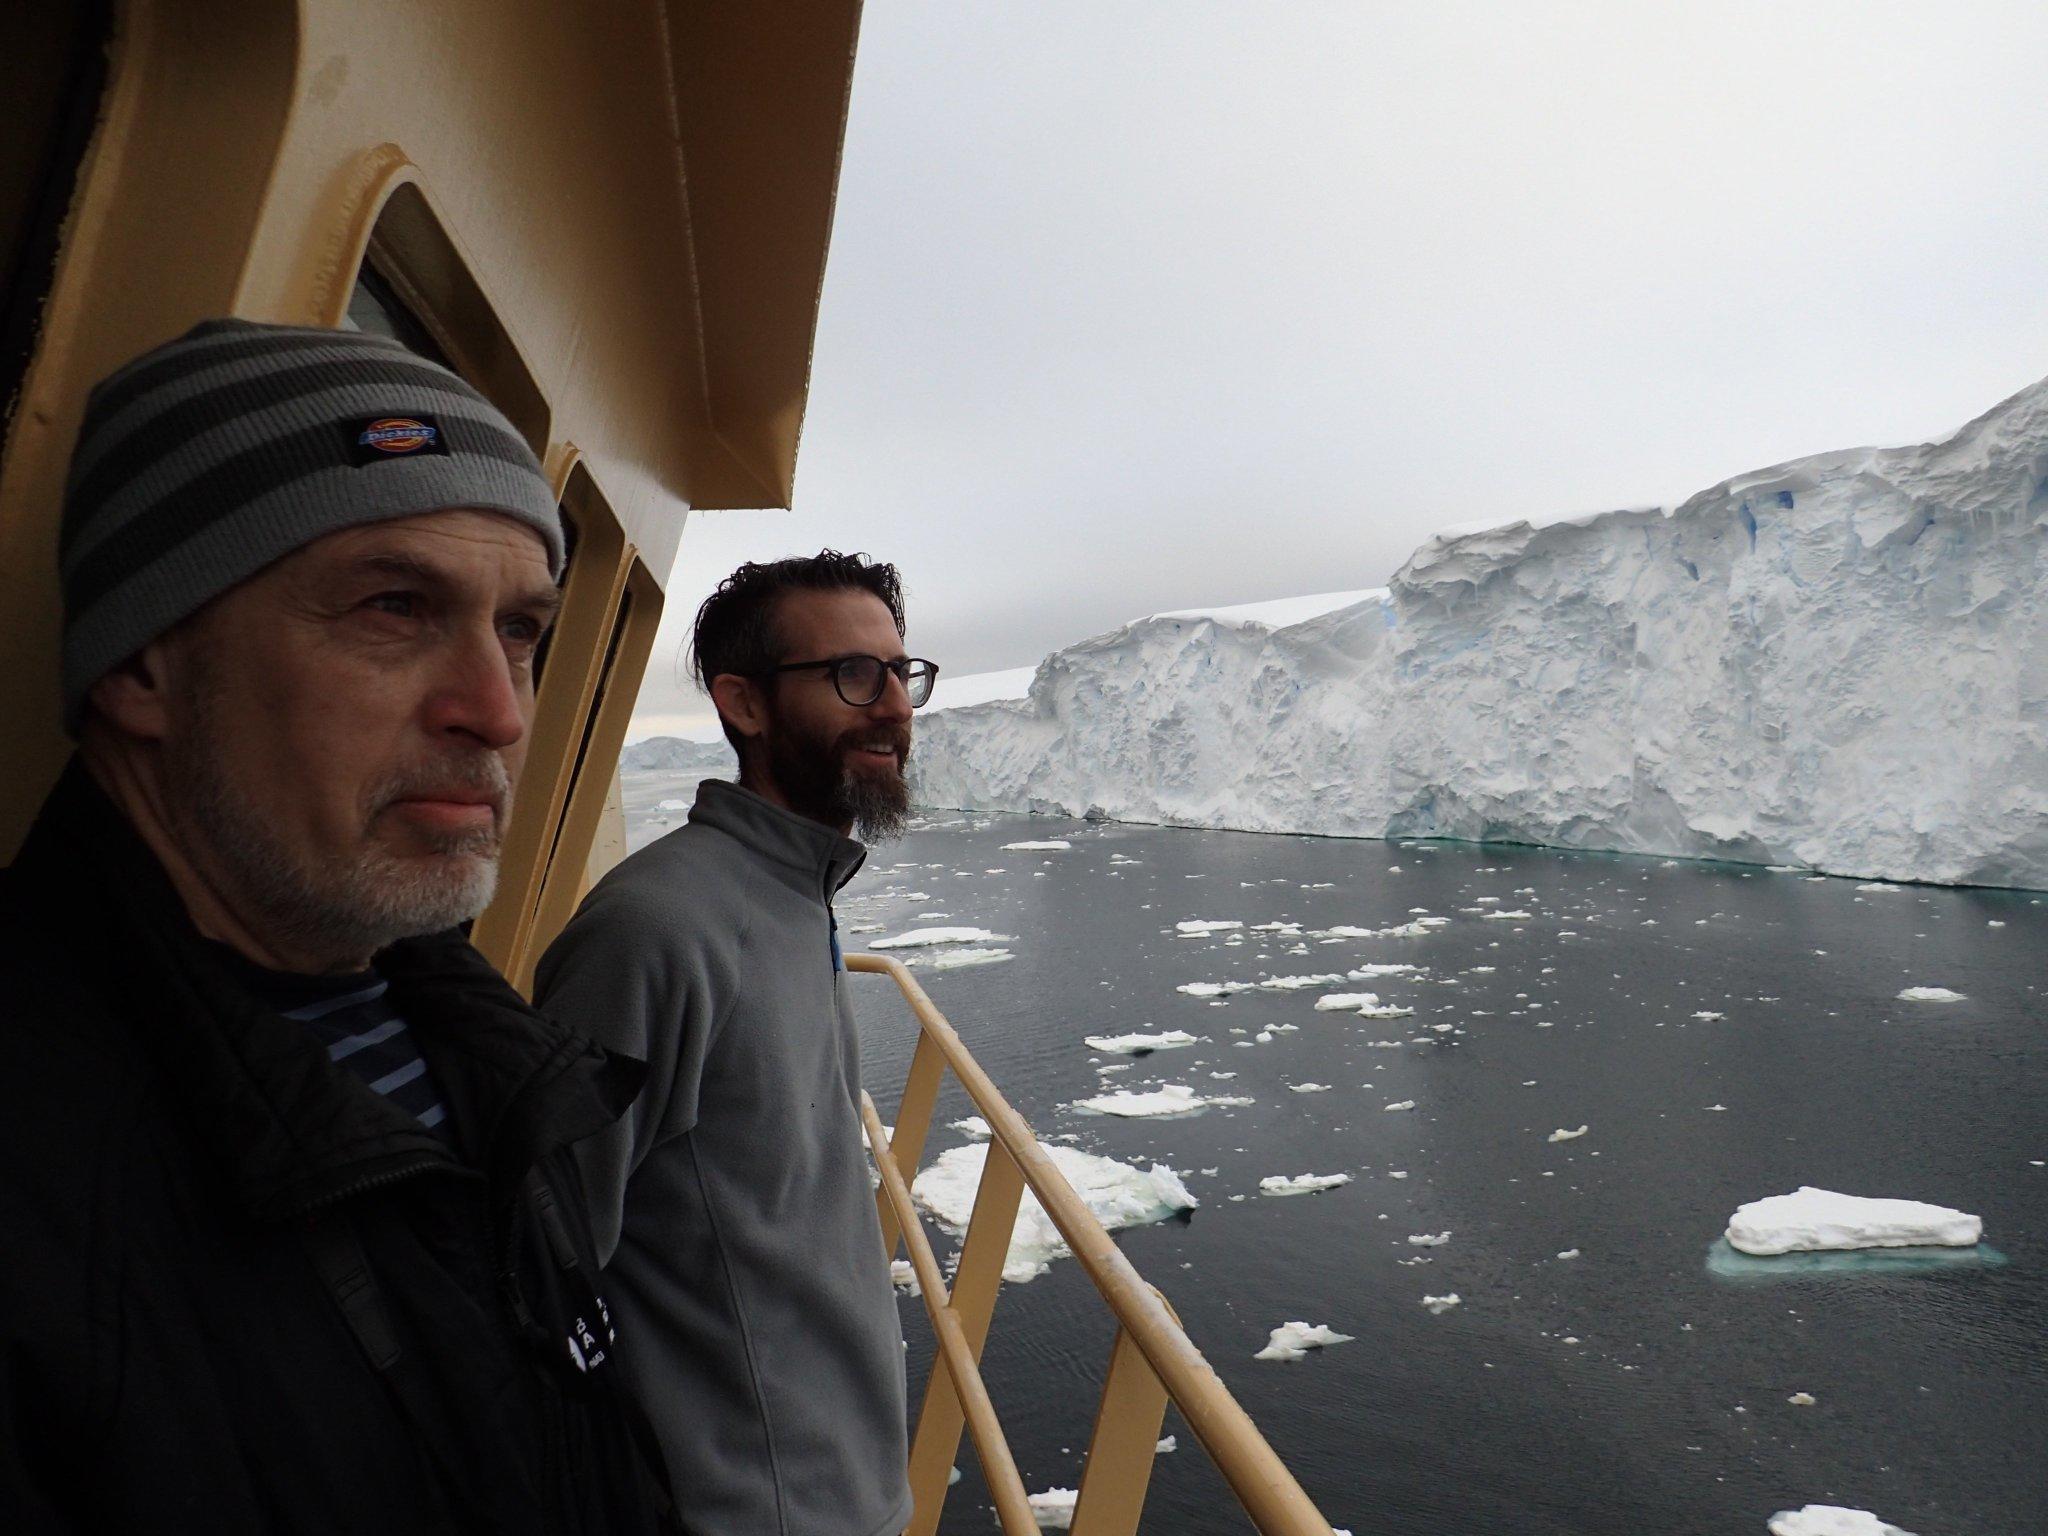 thor-scientists-look-on-in-awe-at-the-crumbling-ice-face-of-the-thwaites-glacier-margin.jpg 